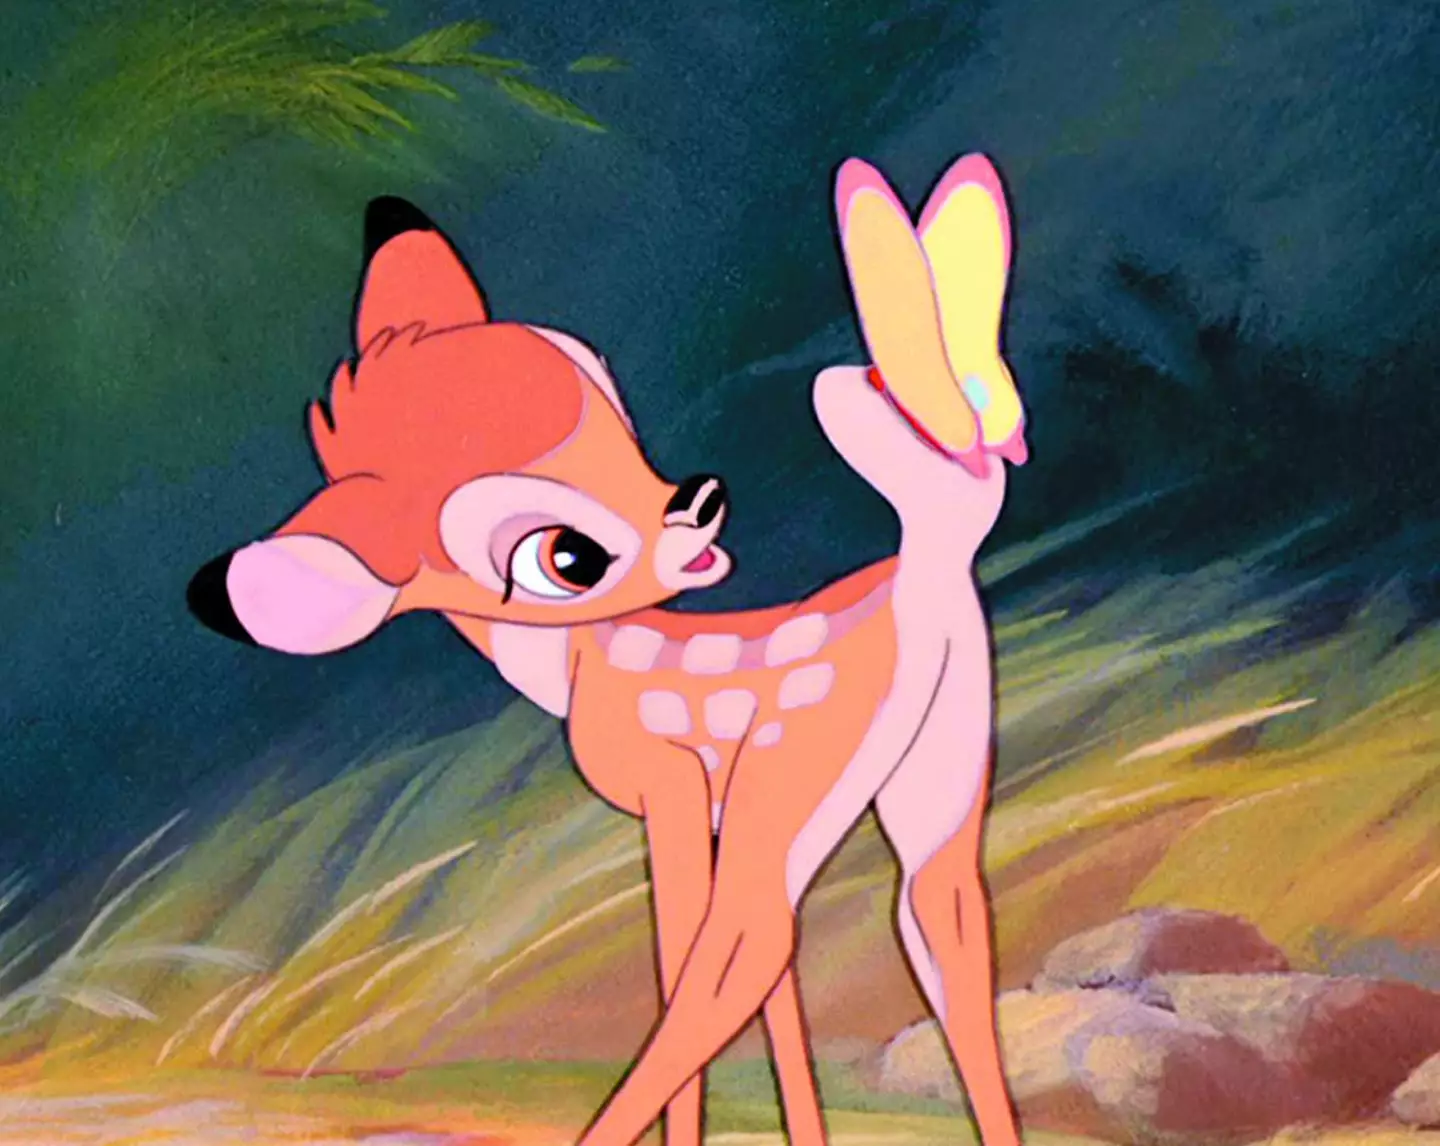 An influencer has defended the choice of 'Bambi' as a baby name.